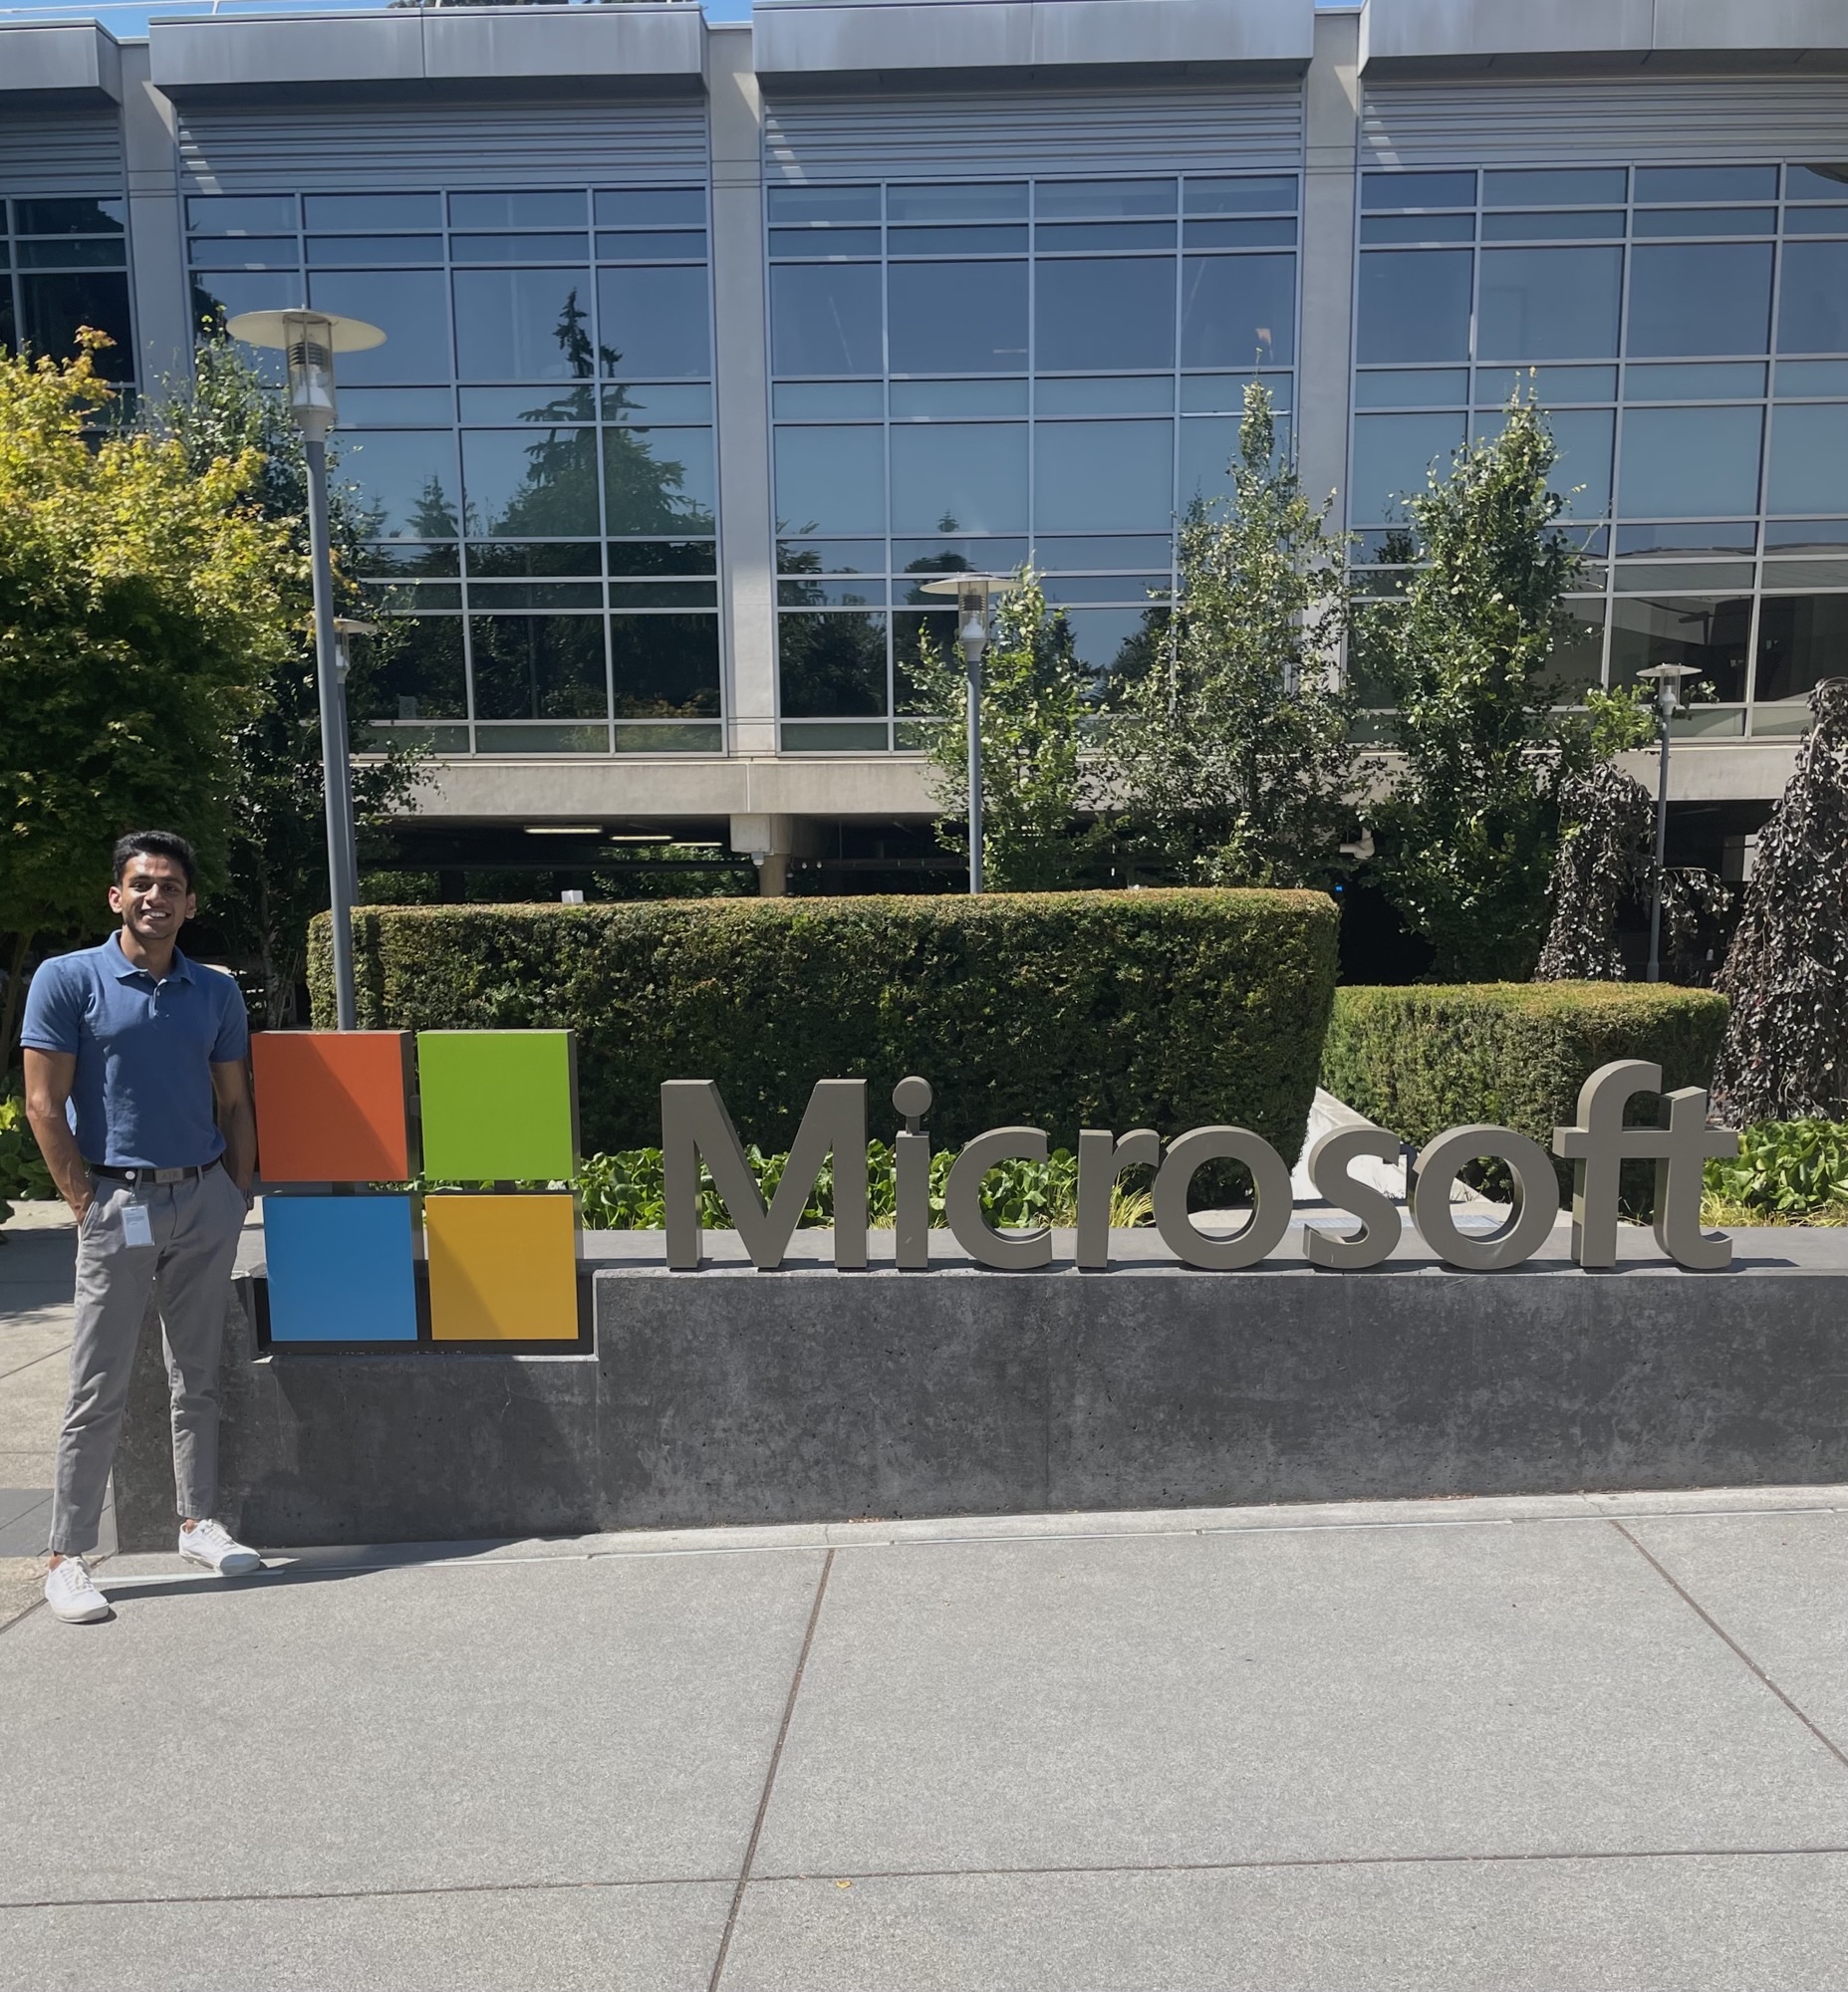 intern in front of microsoft sign